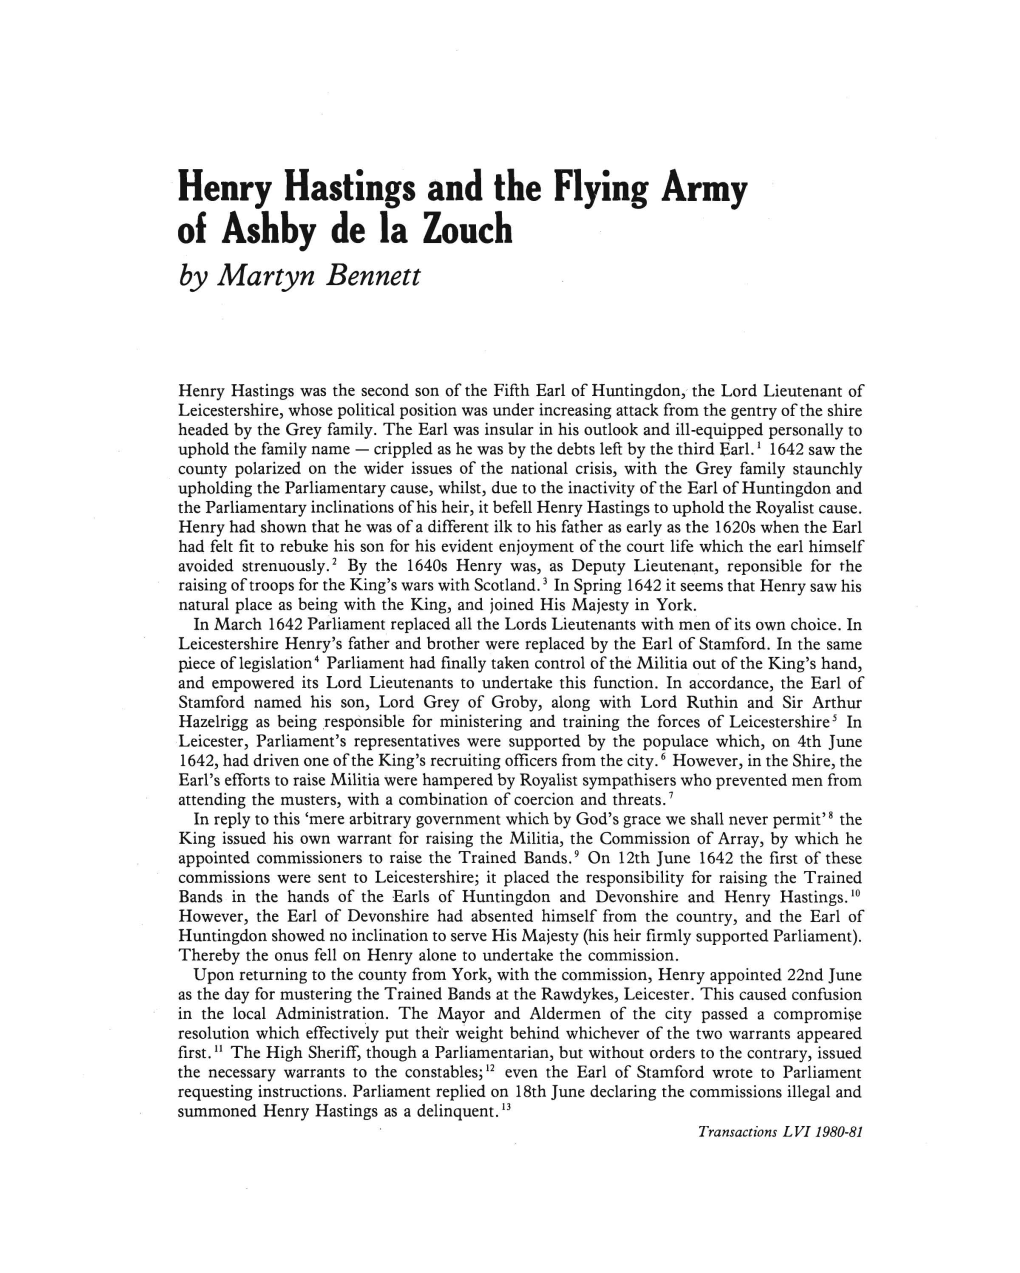 Henry Hastings and the Flying Army of Ashby De La Zouch by Martyn Bennett